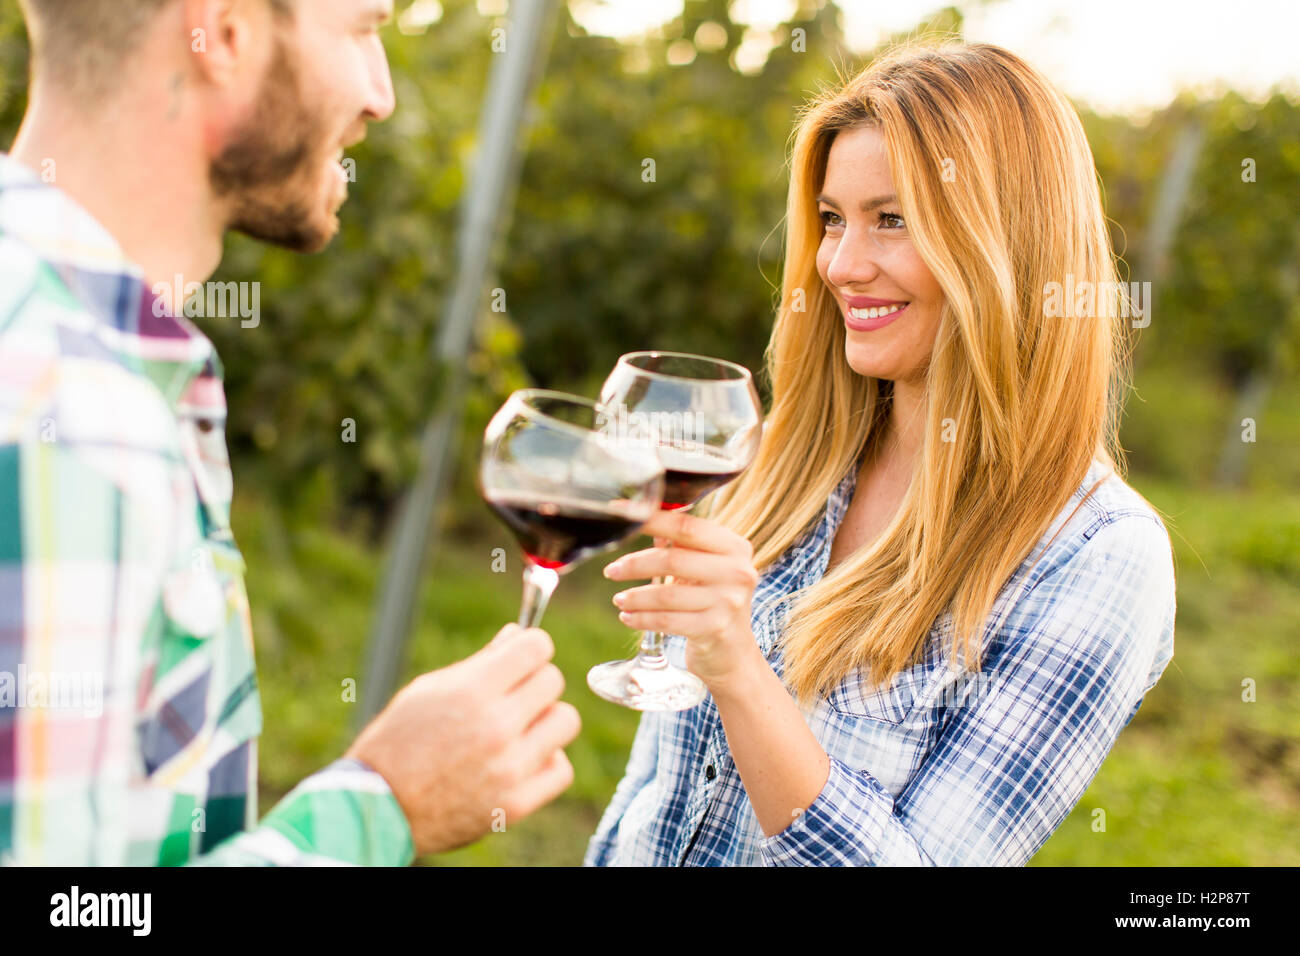 Young happy couple holding glasses of wine in the grape fields Stock Photo